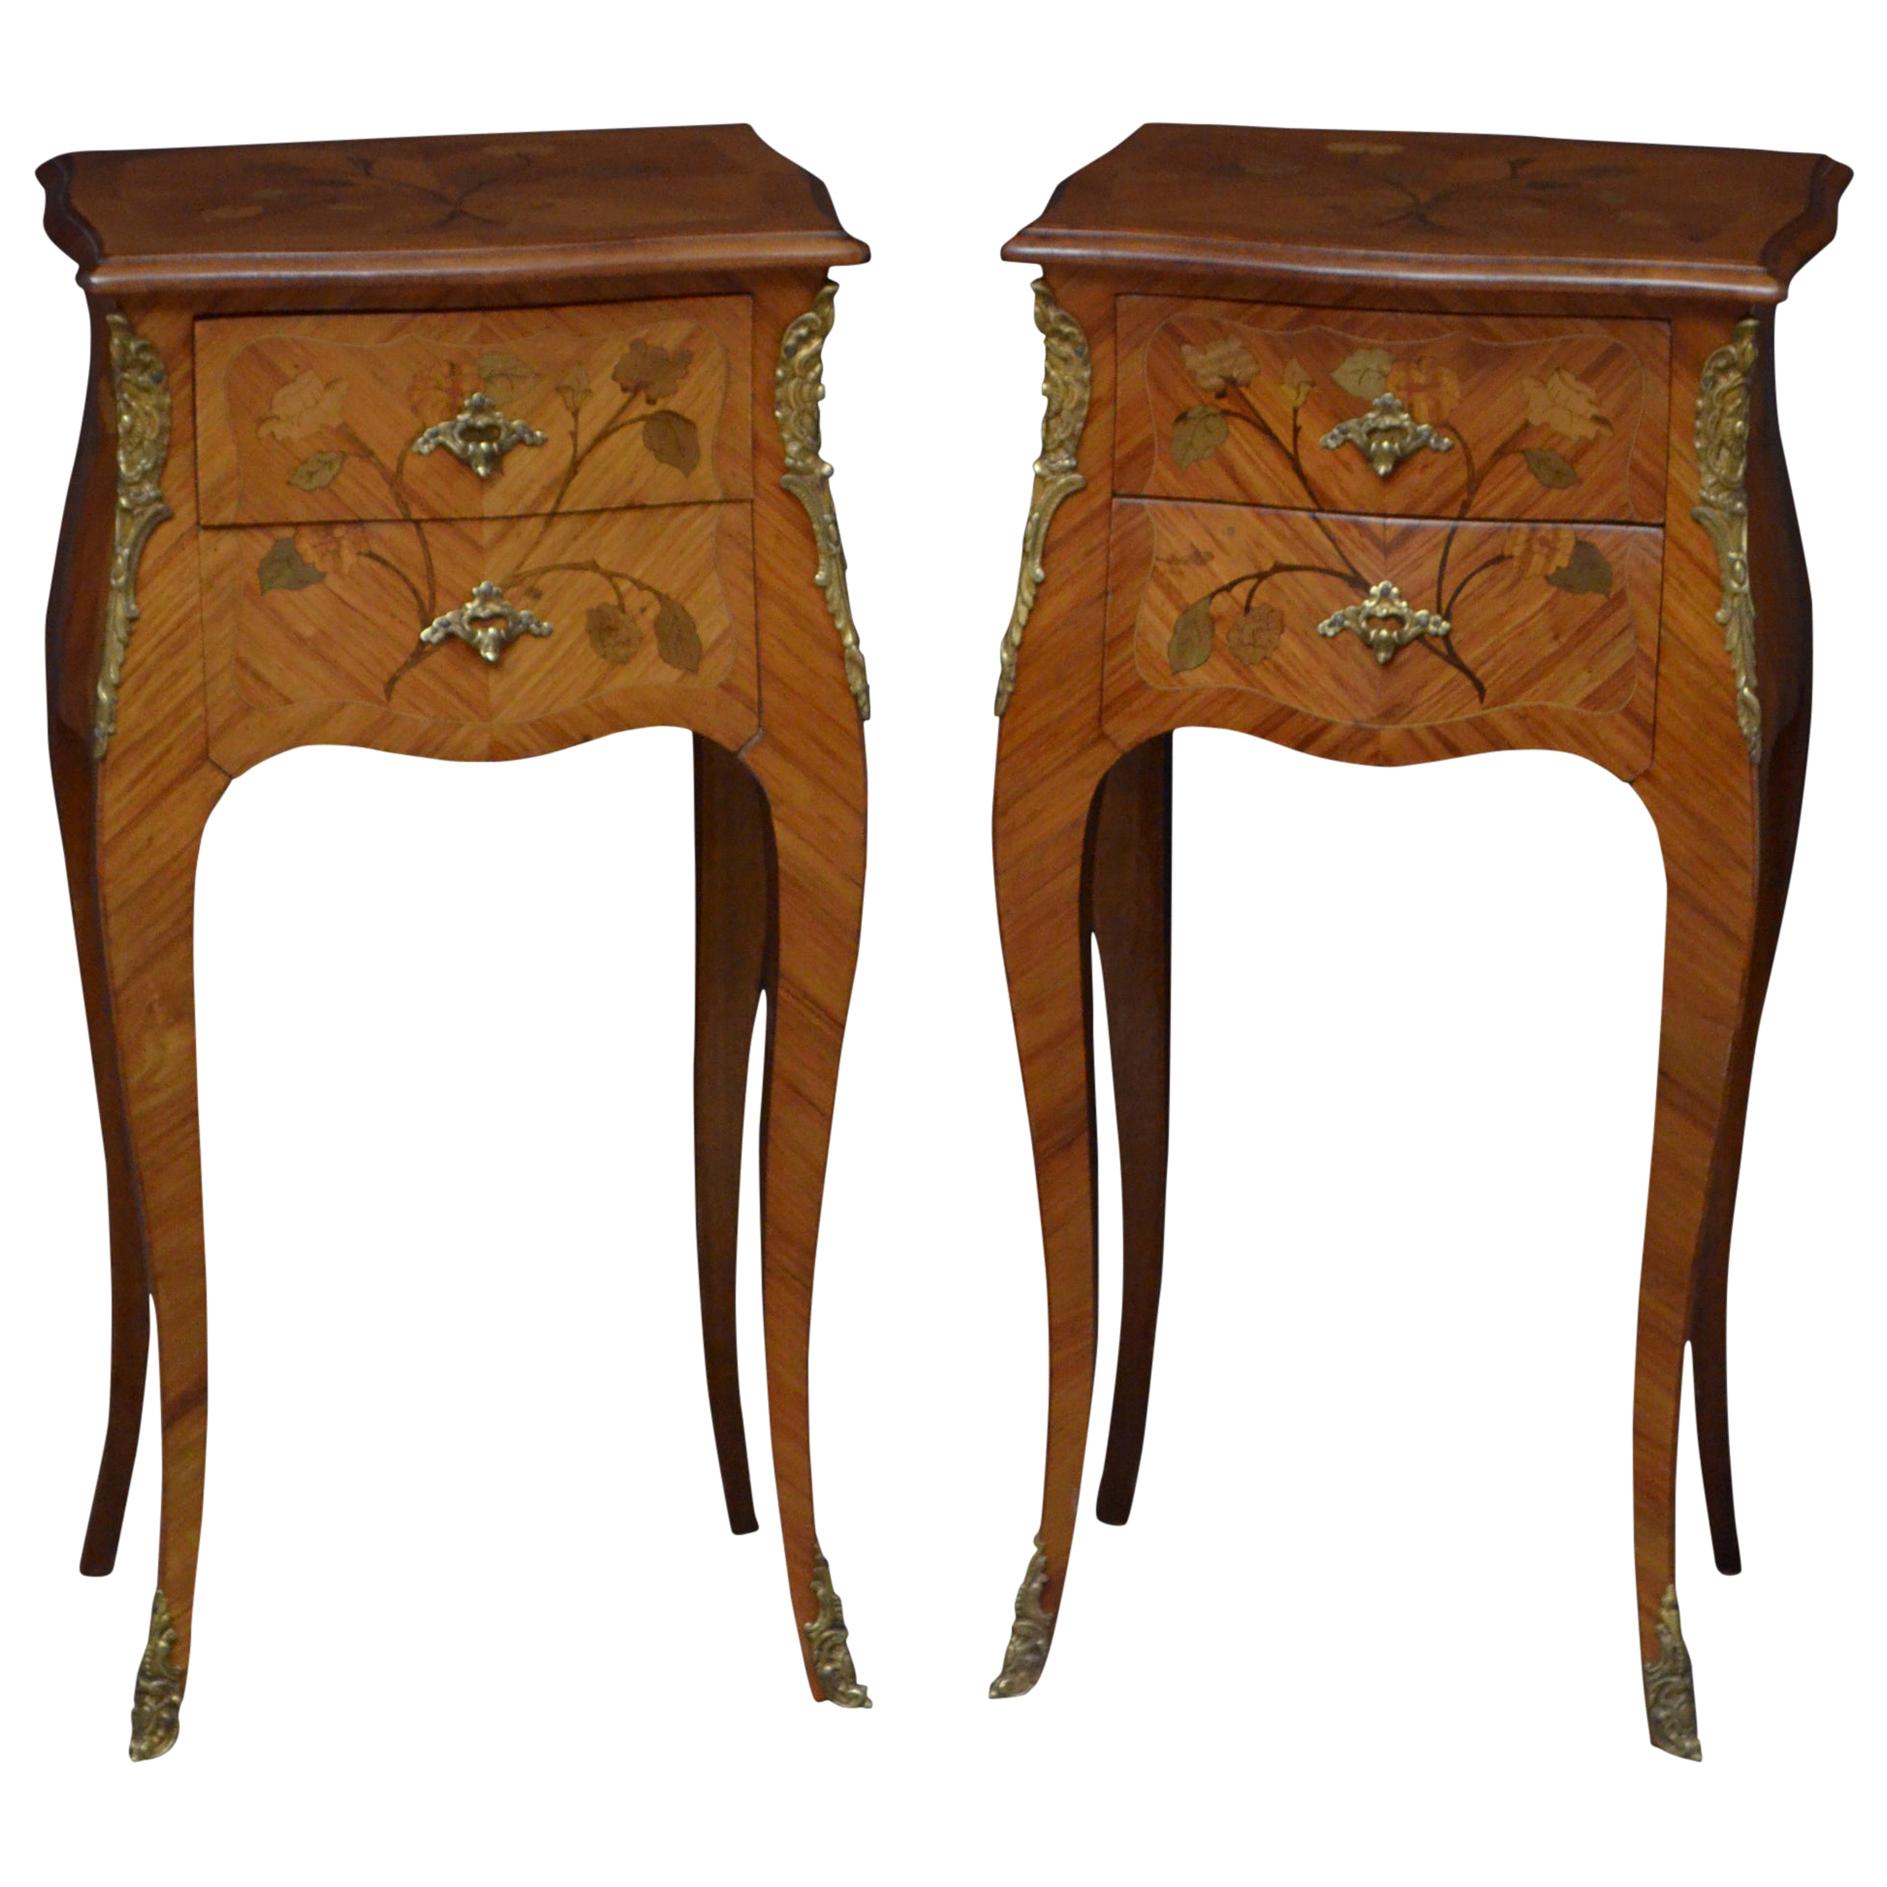 Pair of French Bedside Cabinets in Kingwood